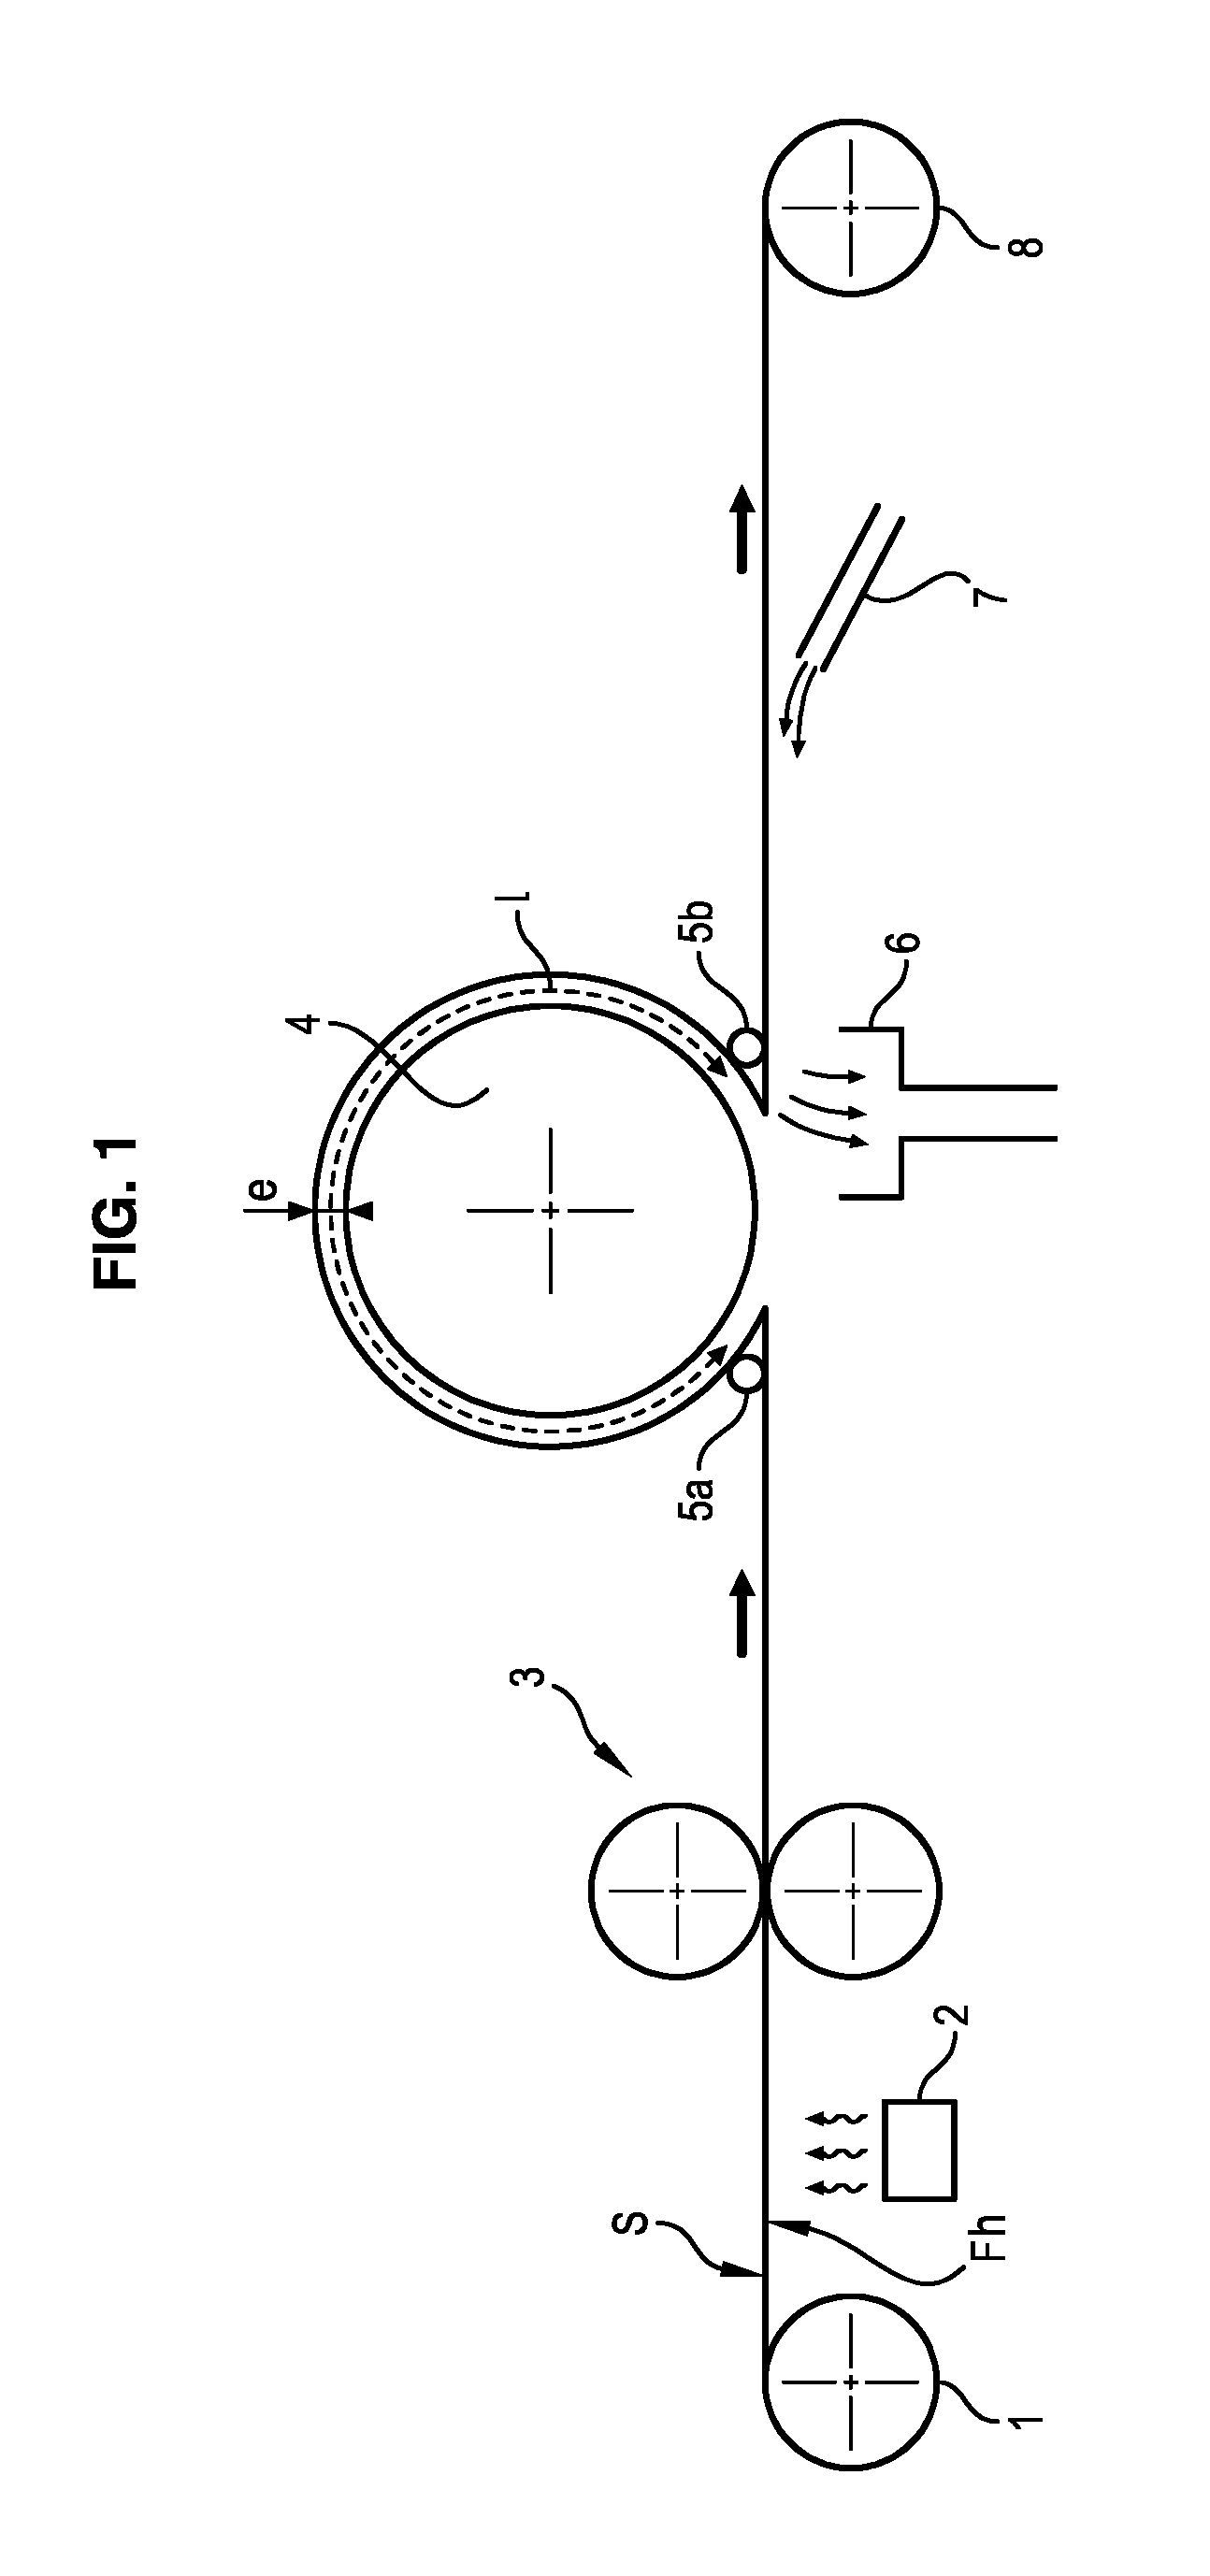 Machine and treatment process via chromatogenous grafting of a hydroxylated substrate